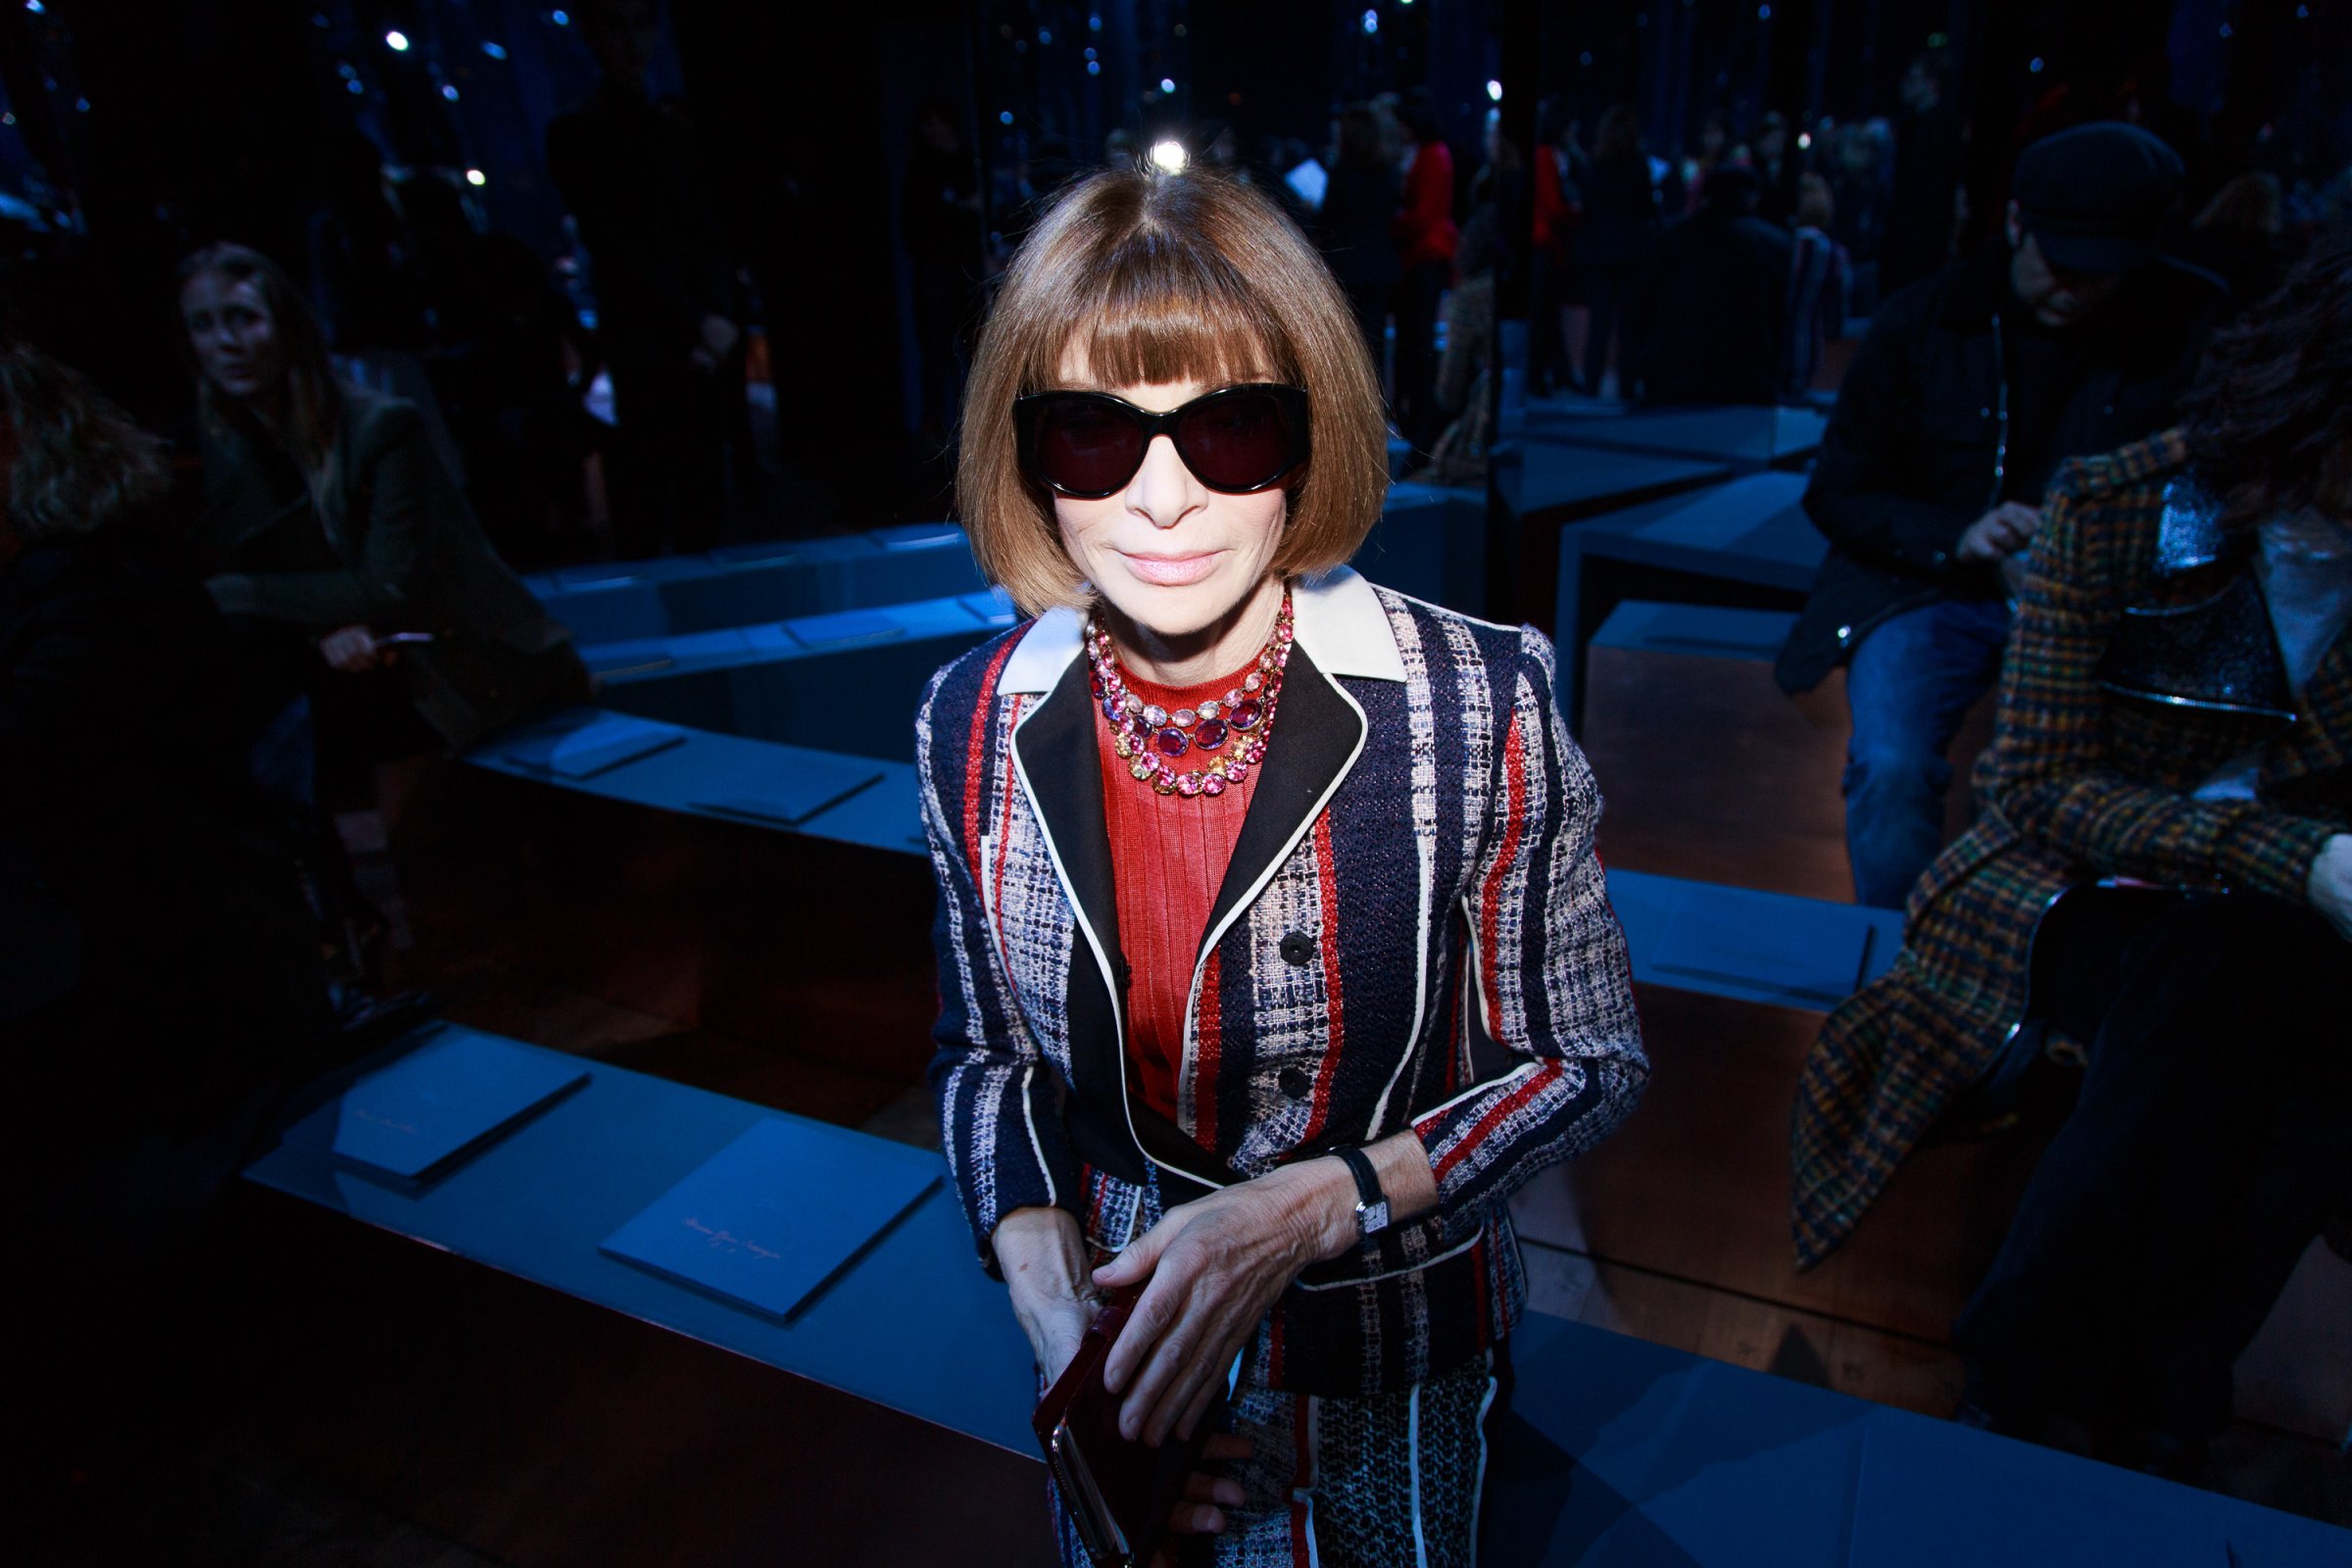 Anna Wintour attends the Christian Dior Haute Couture Spring Summer 2016 show as part of Paris Fashion Week on January 25, 2016 in Paris, France.